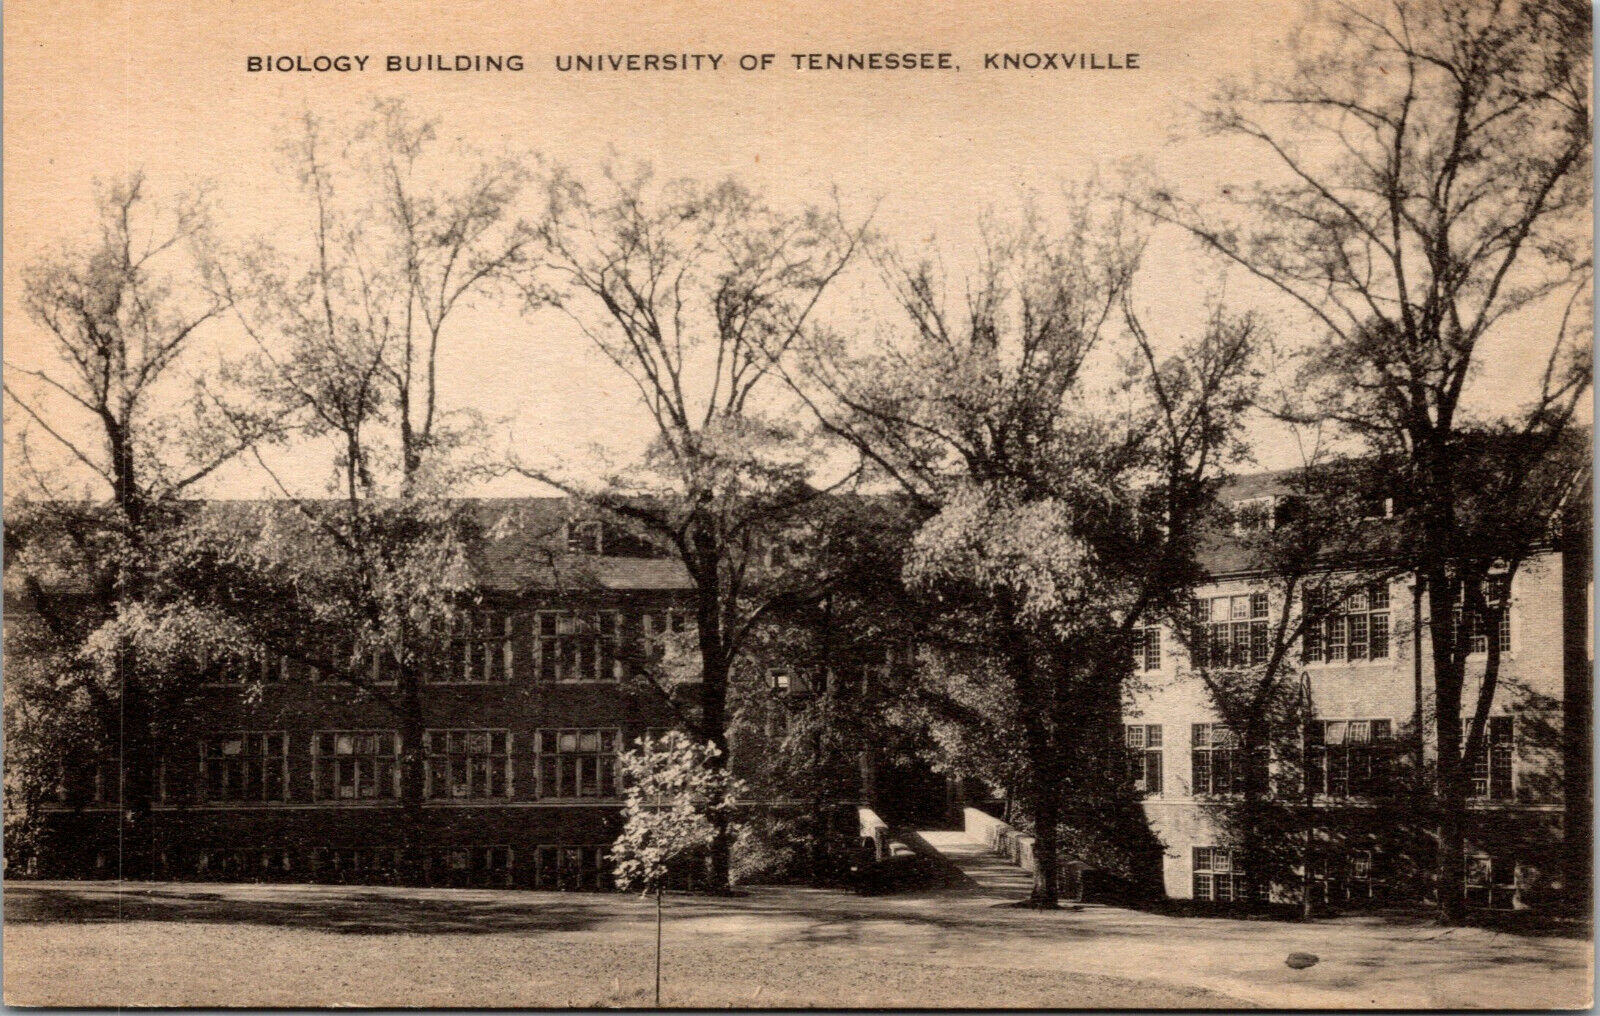 Vtg 1930's Biology Building University Of Tennessee Knoxville TN Postcard